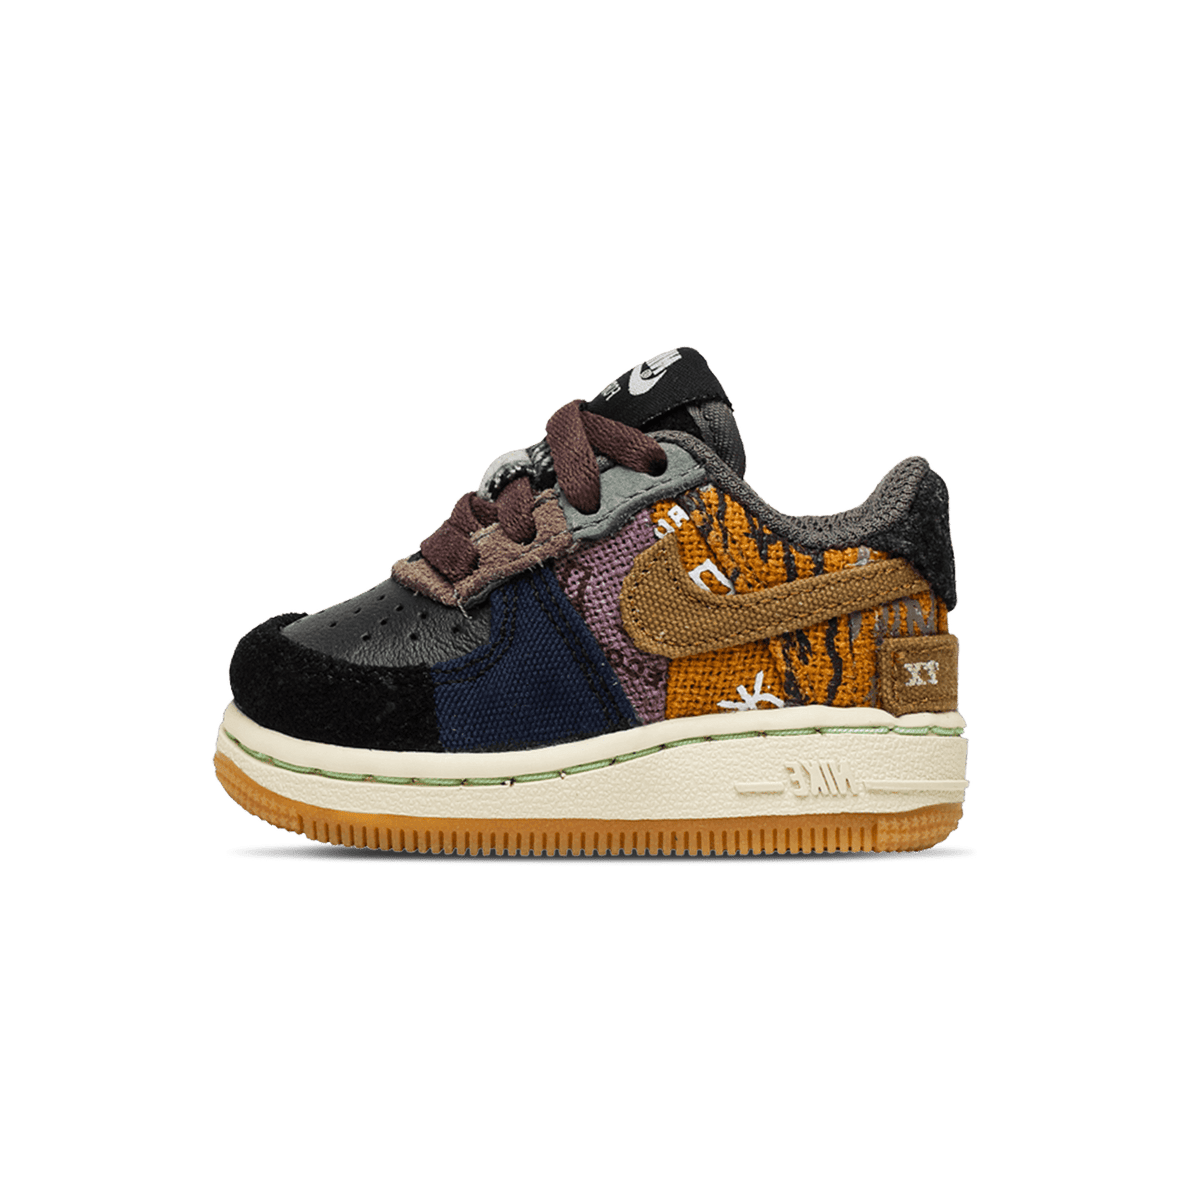 nike Trainers air force 1 shadow particle grey ck6561 100 release date info Low x Travis Scott TD 'Cactus Jack' - CerbeShops